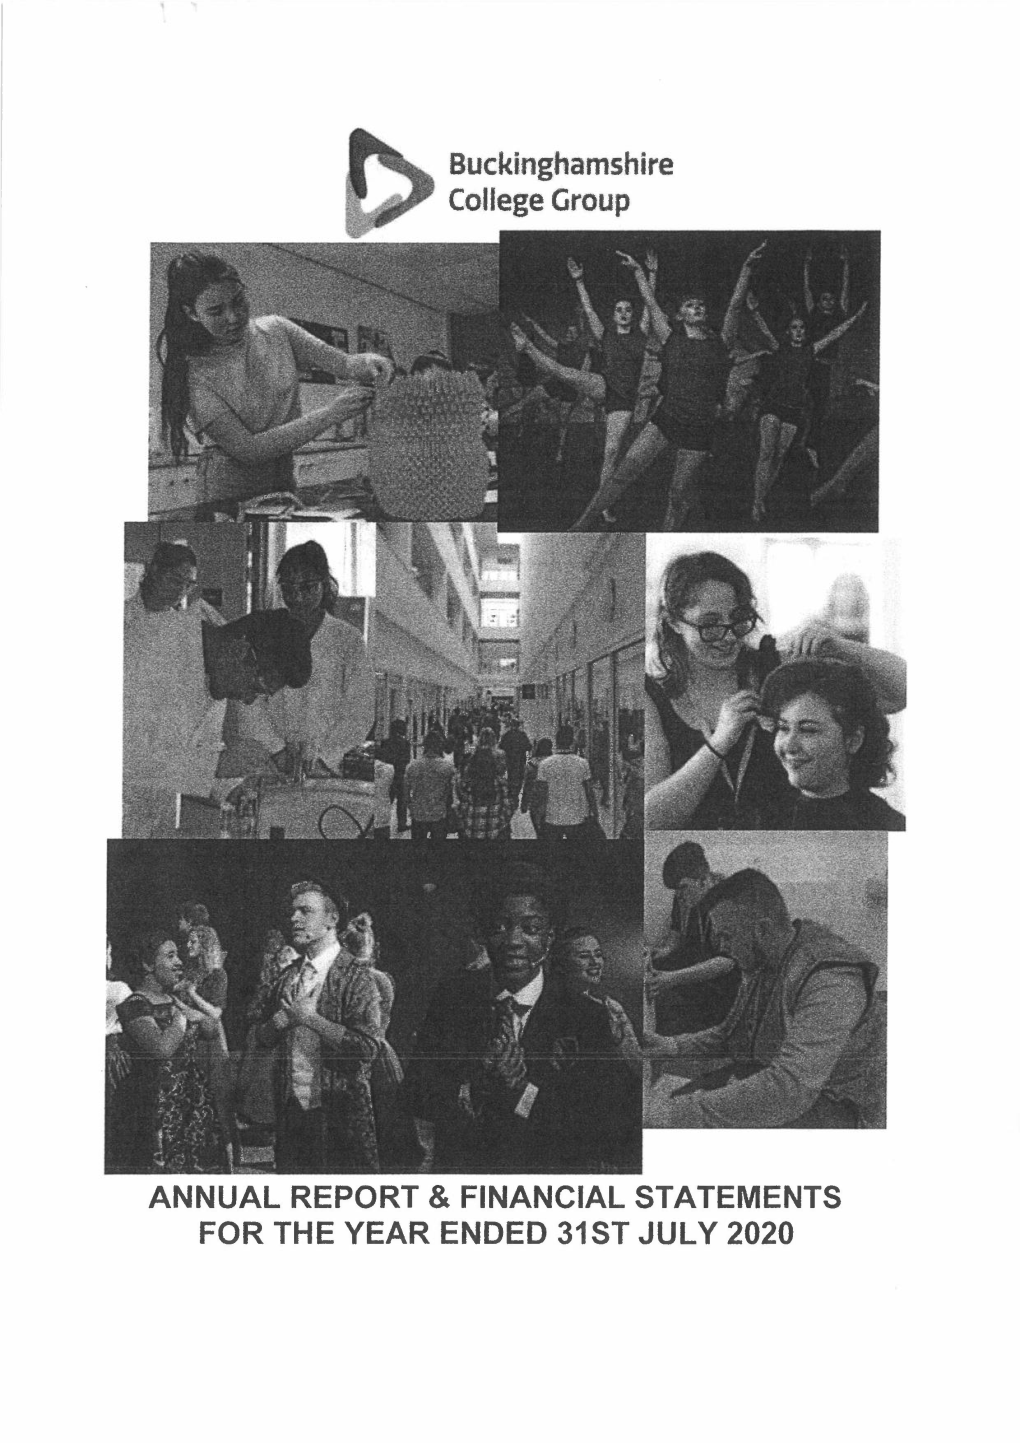 Buckinghamshire College Group Annual Report and Accounts 31 July 2020